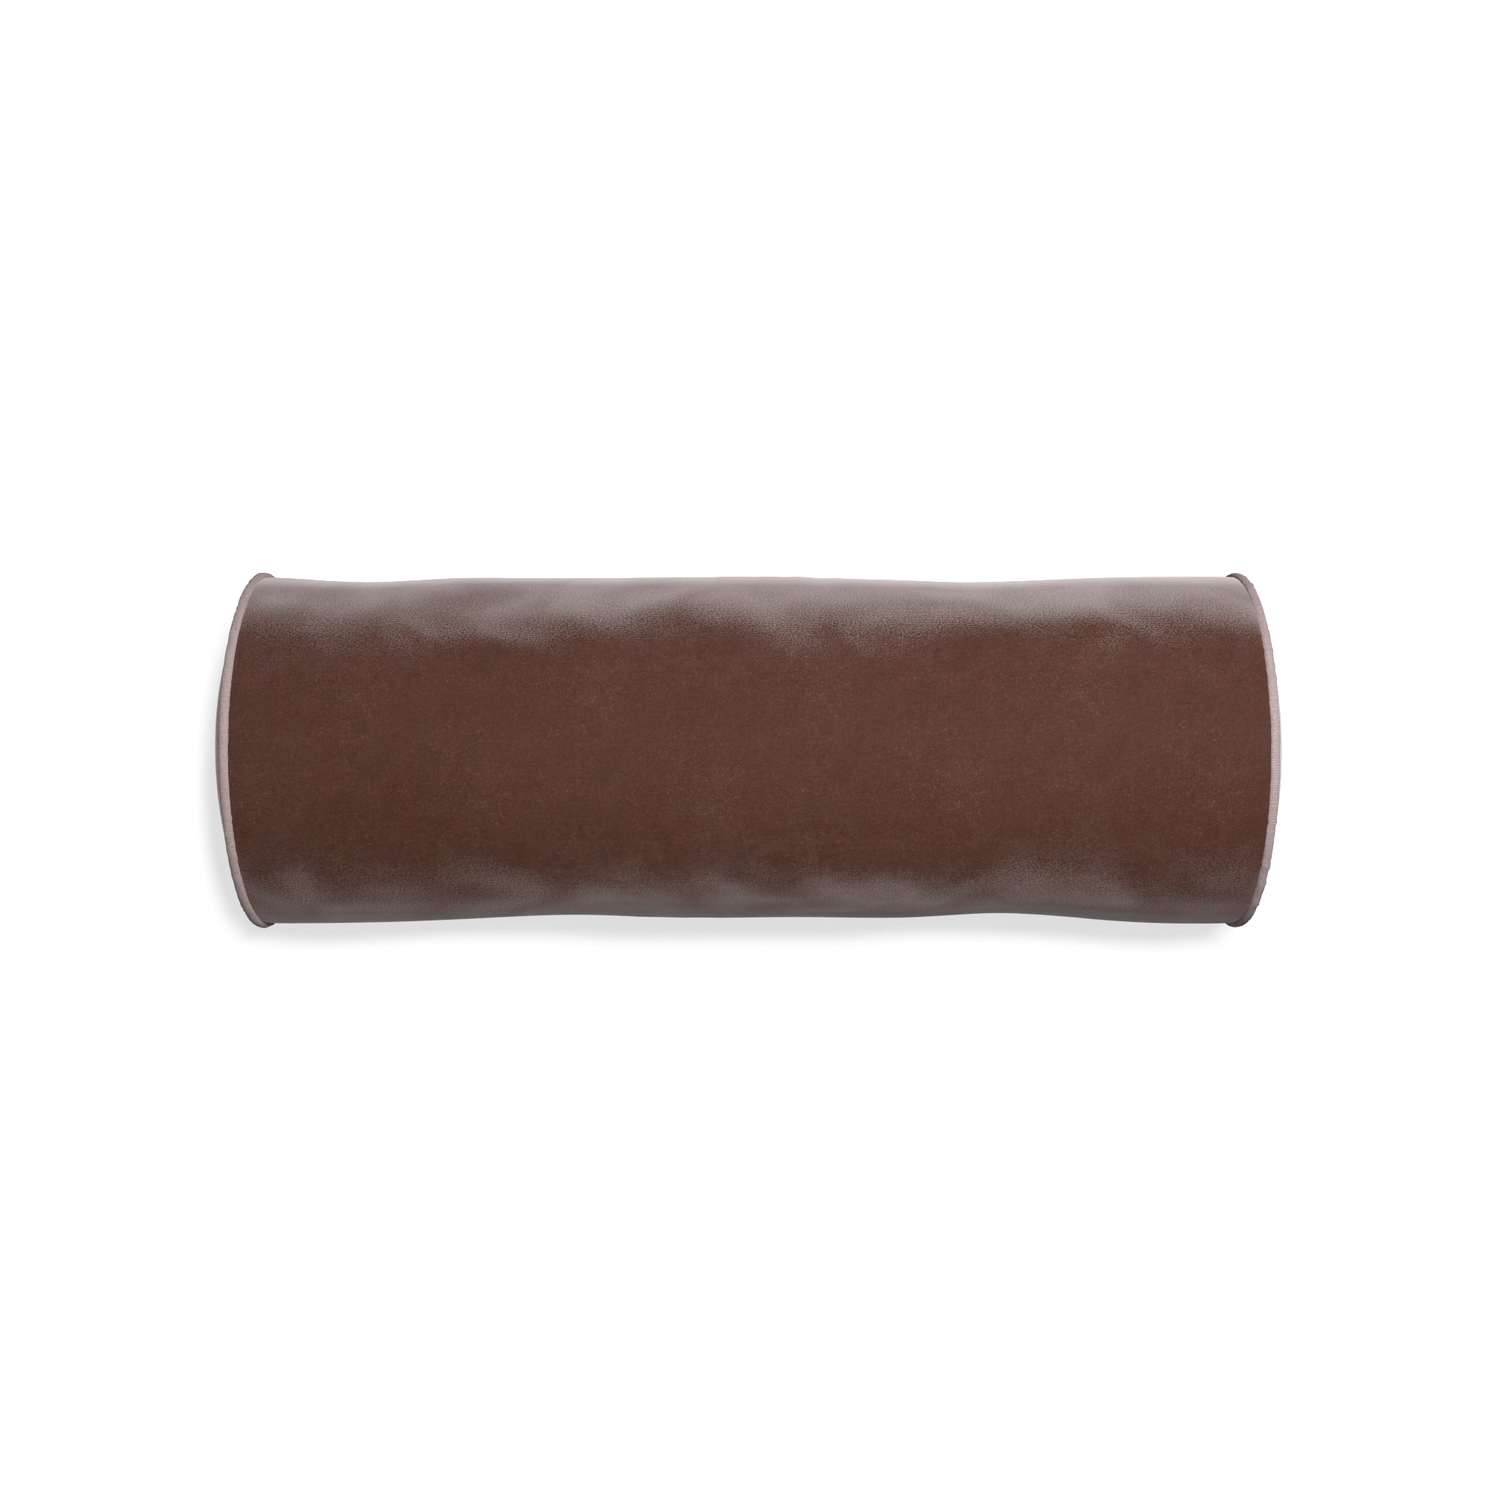 Bolster walnut velvet custom brownpillow with orchid piping on white background